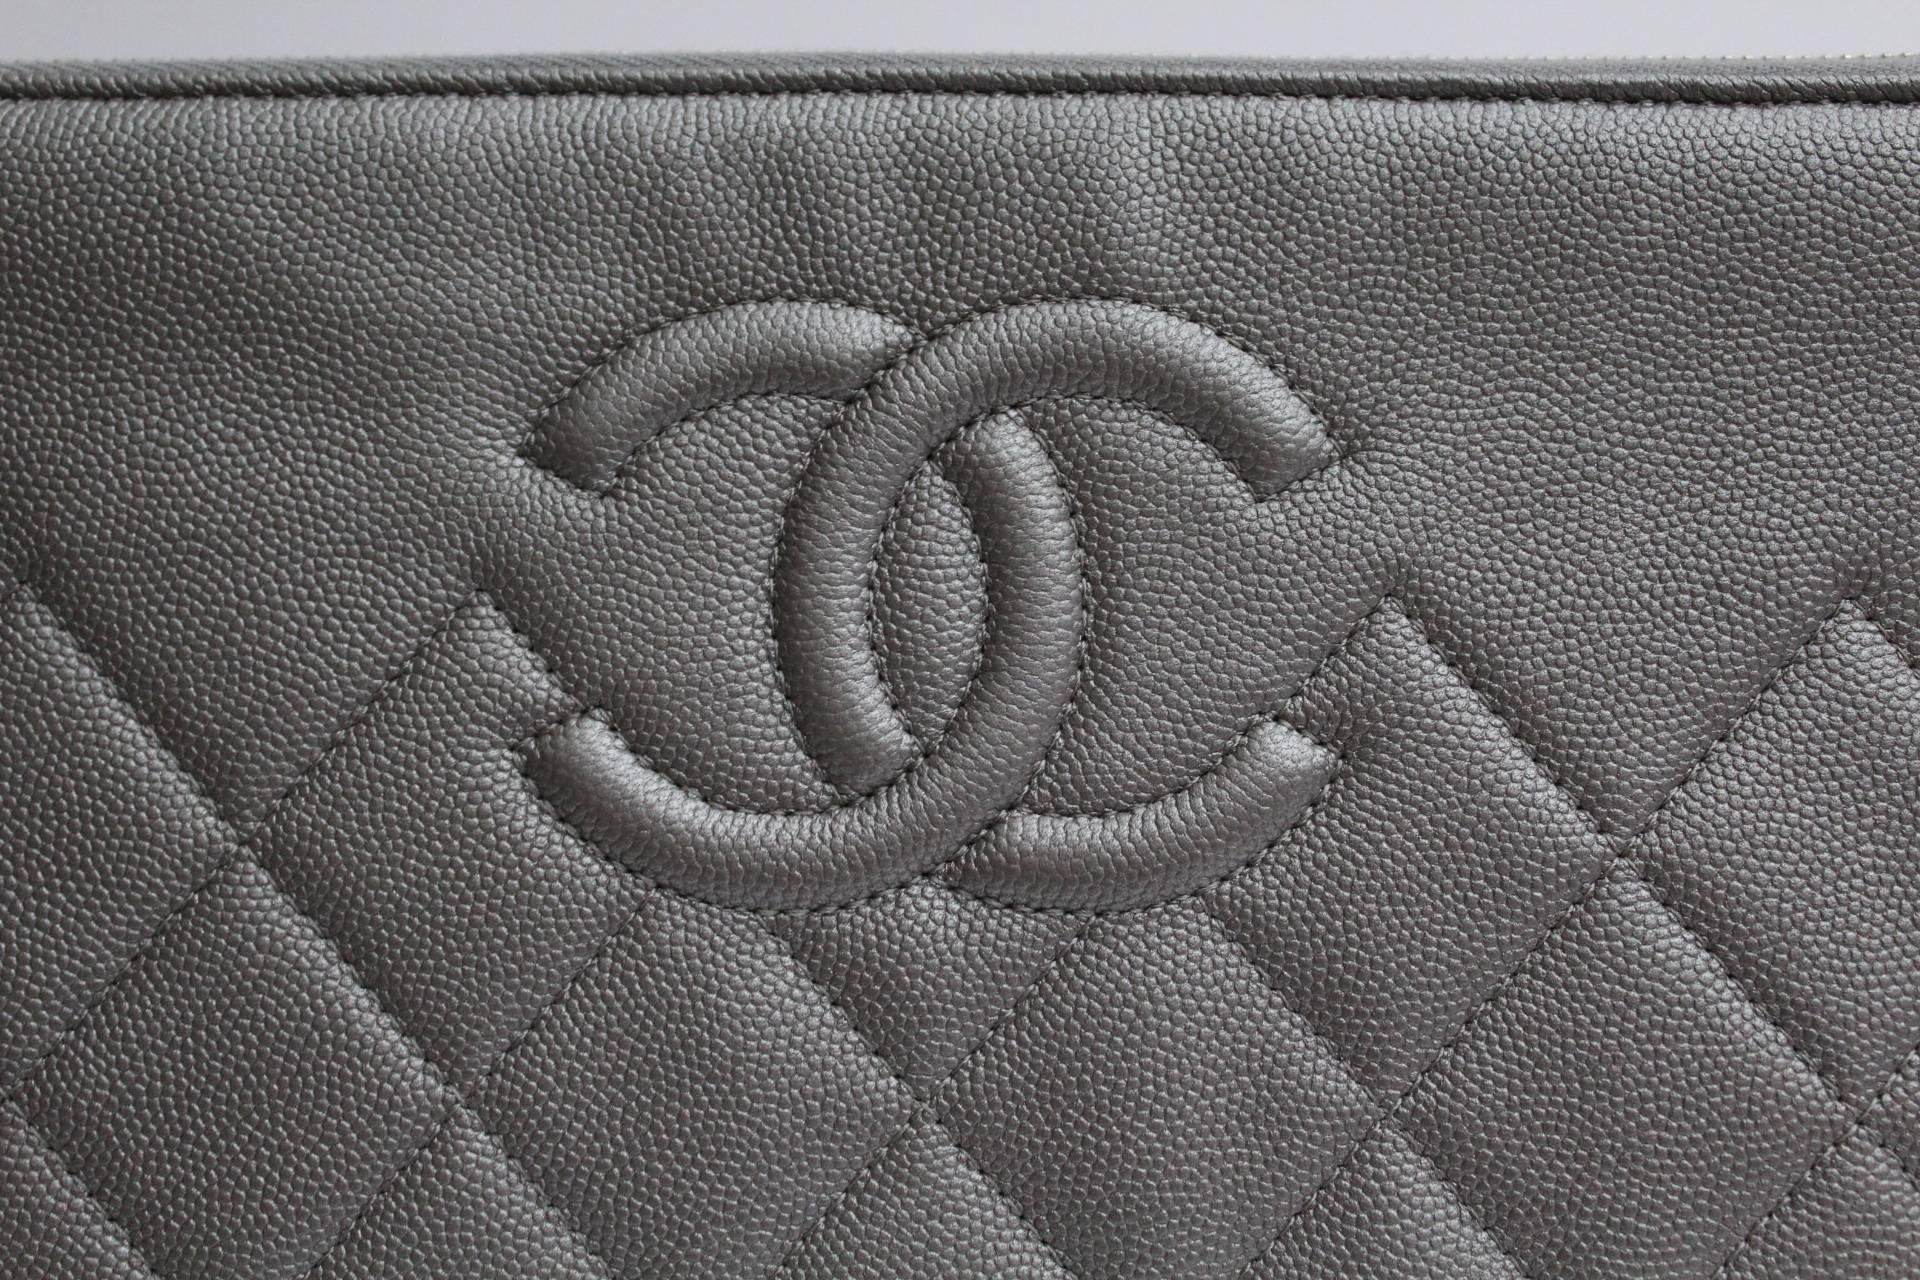 Pochette Chanel 2017 collection with grained silver leather.
Zip closure.
Inside is nylon.
Good condition.
Dustbag, card and box.